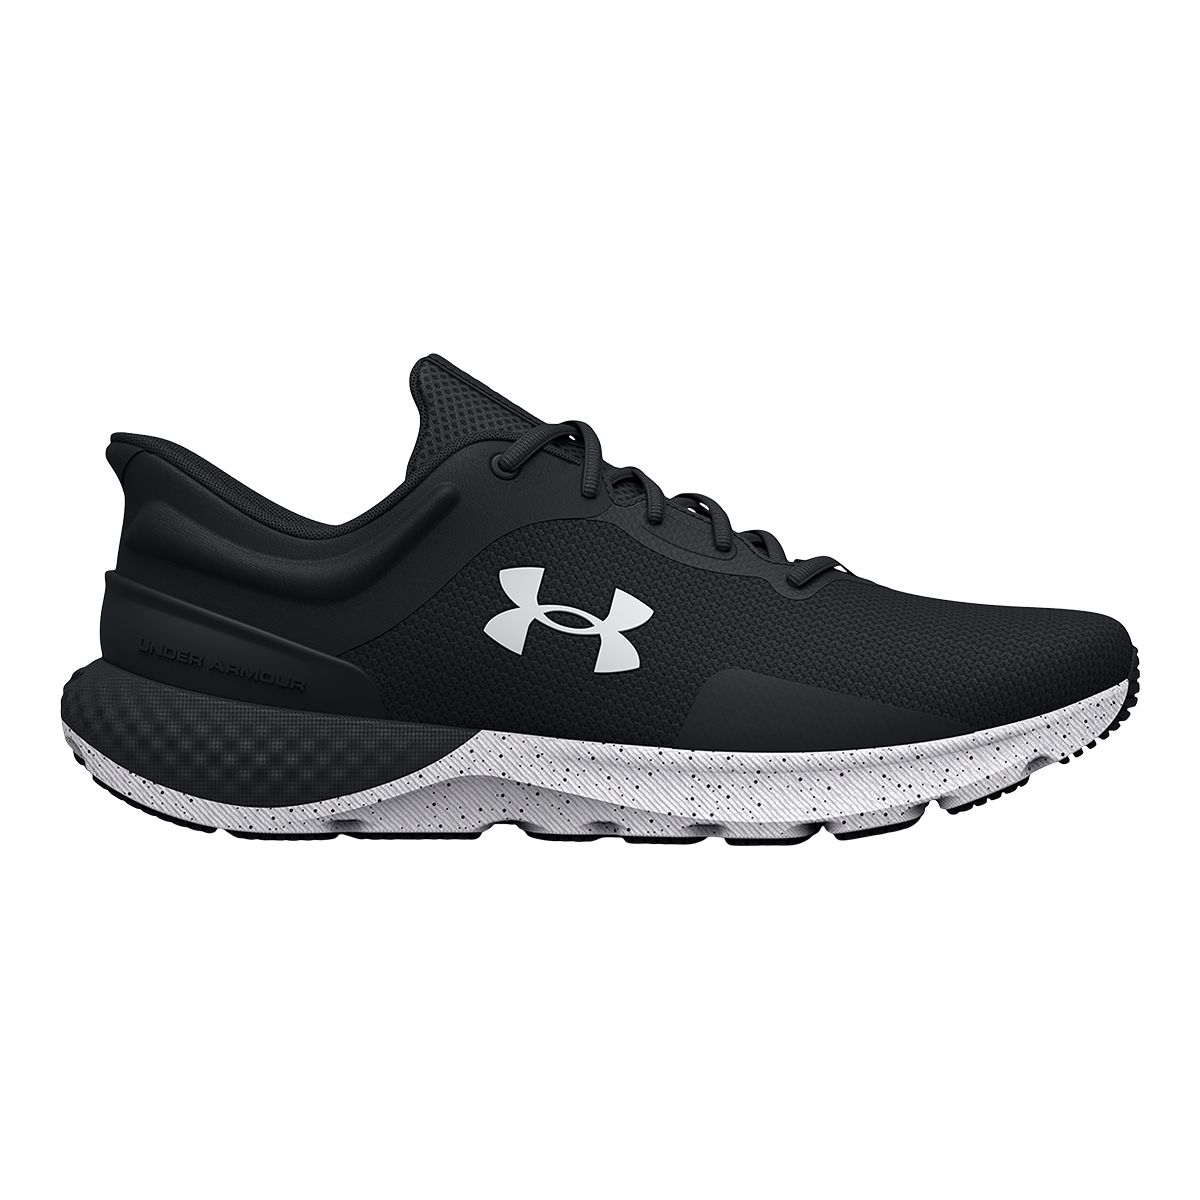 Under Armour Men's Charged Escape 4 Evo Extra Wide Running Shoes